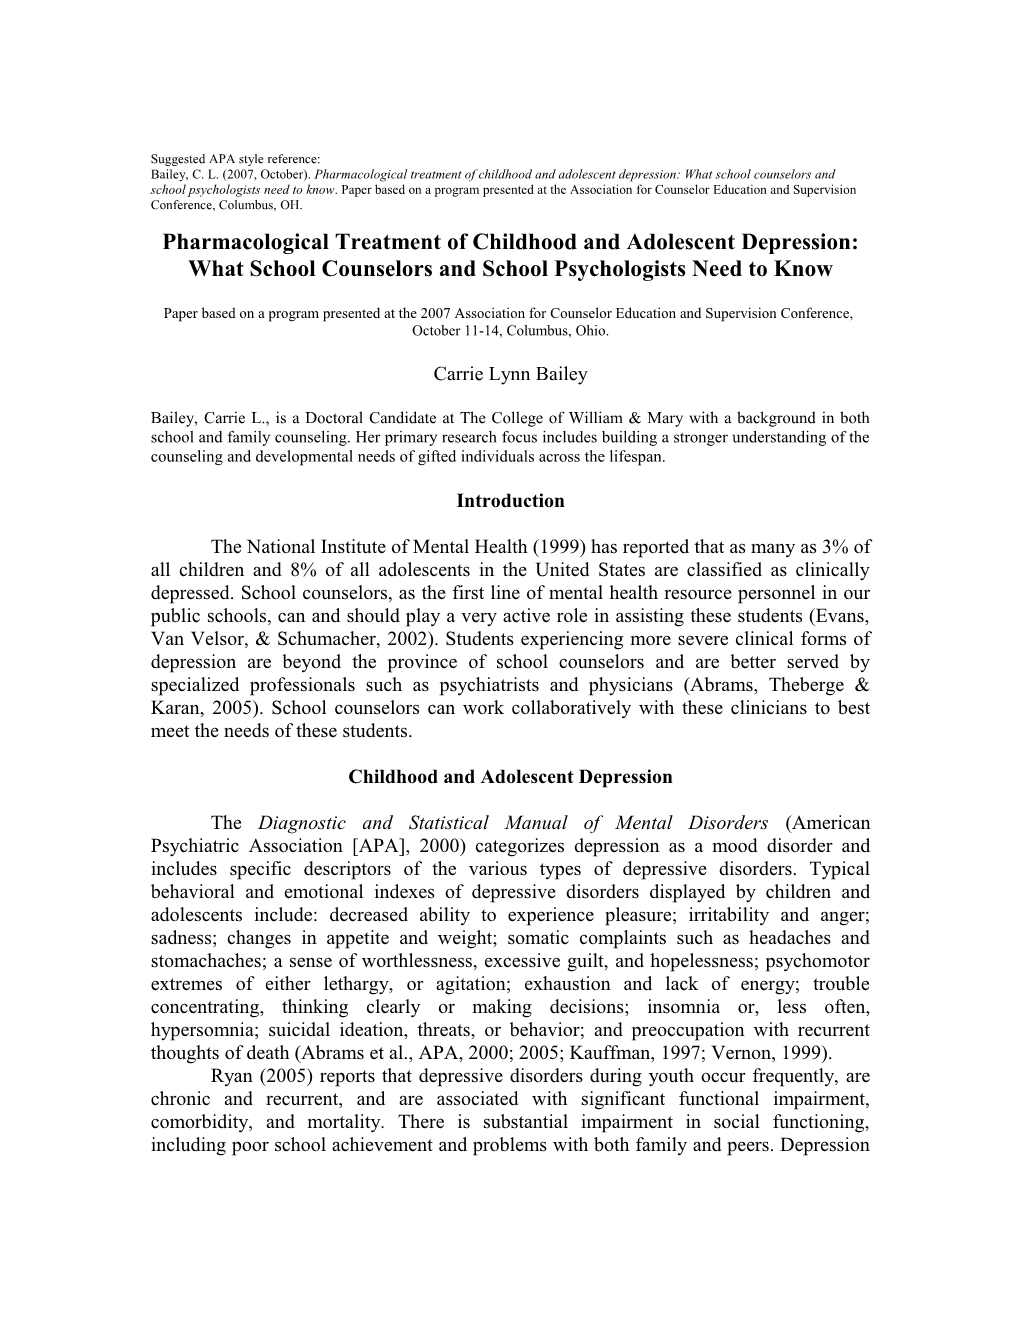 Pharmacological Treatment of Childhood and Adolescent Depression: What School Counselors